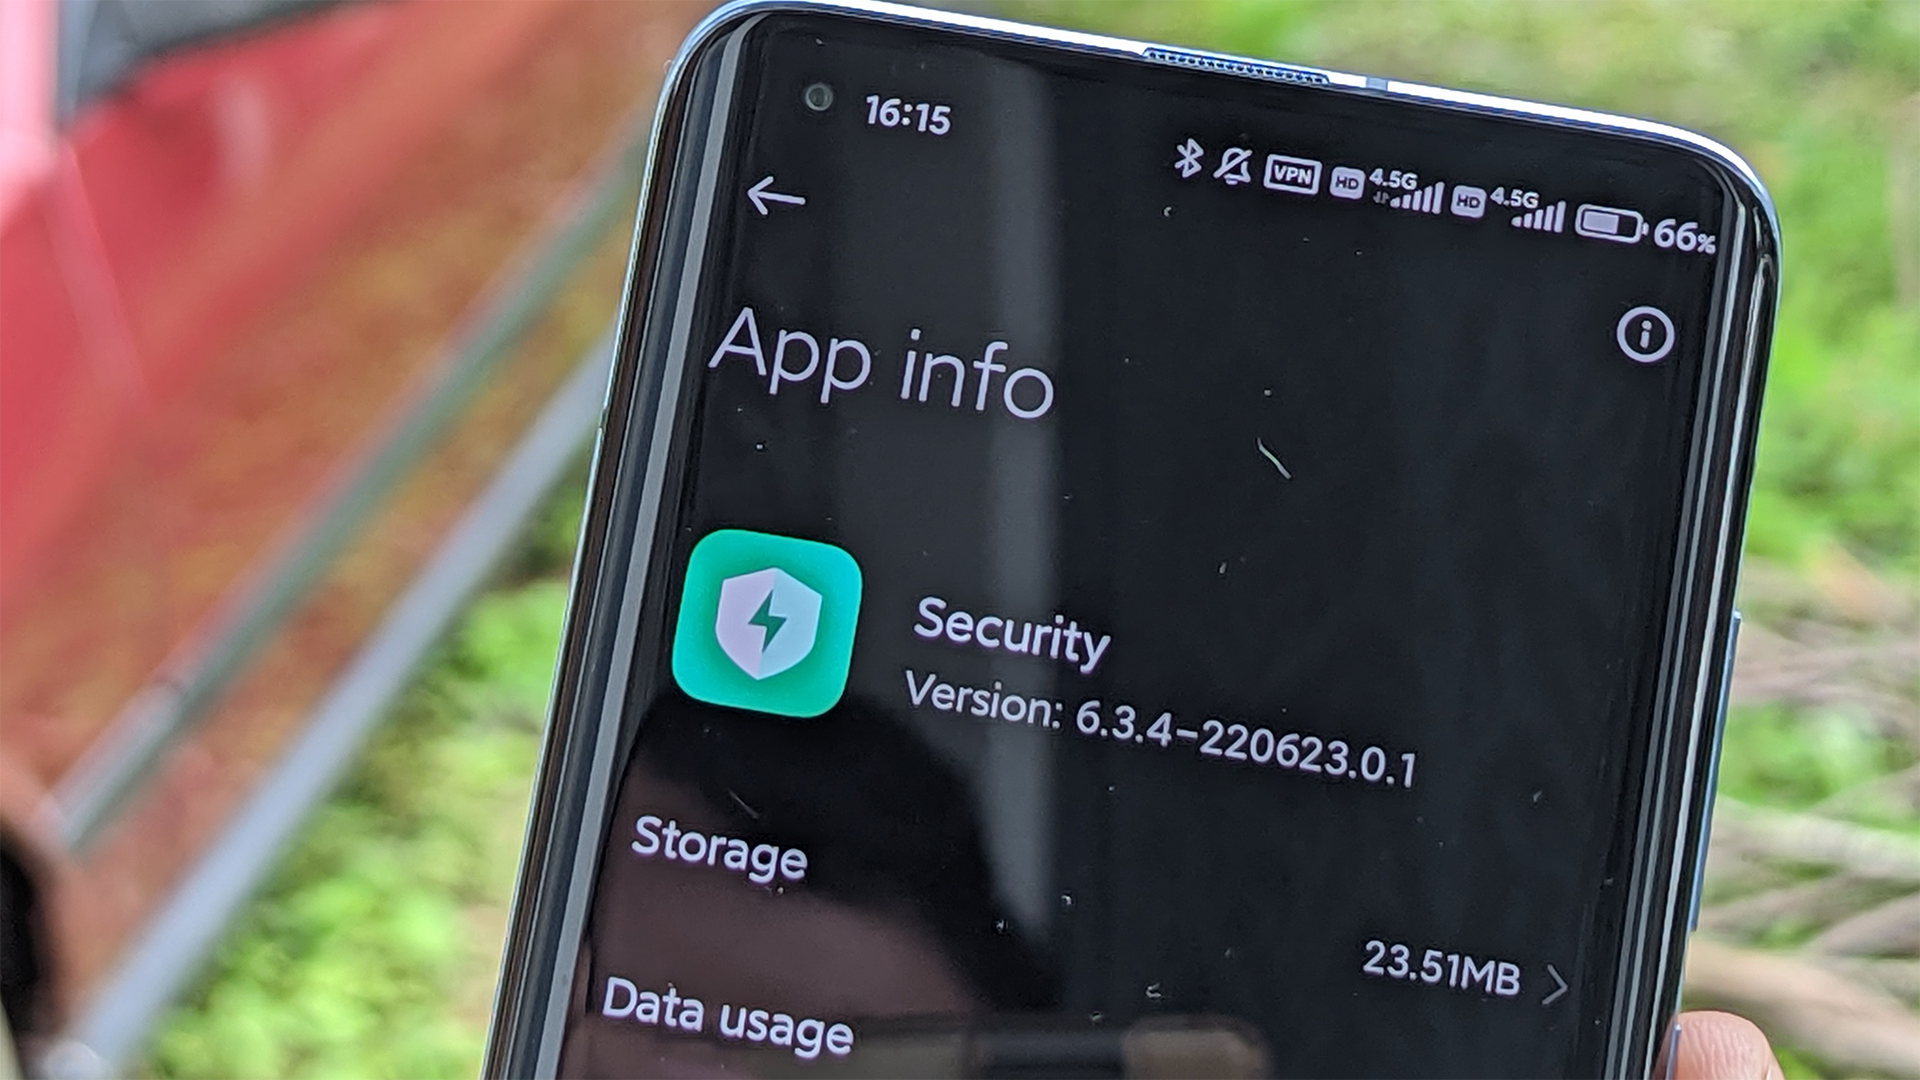 MIUI Security app features explained by detail